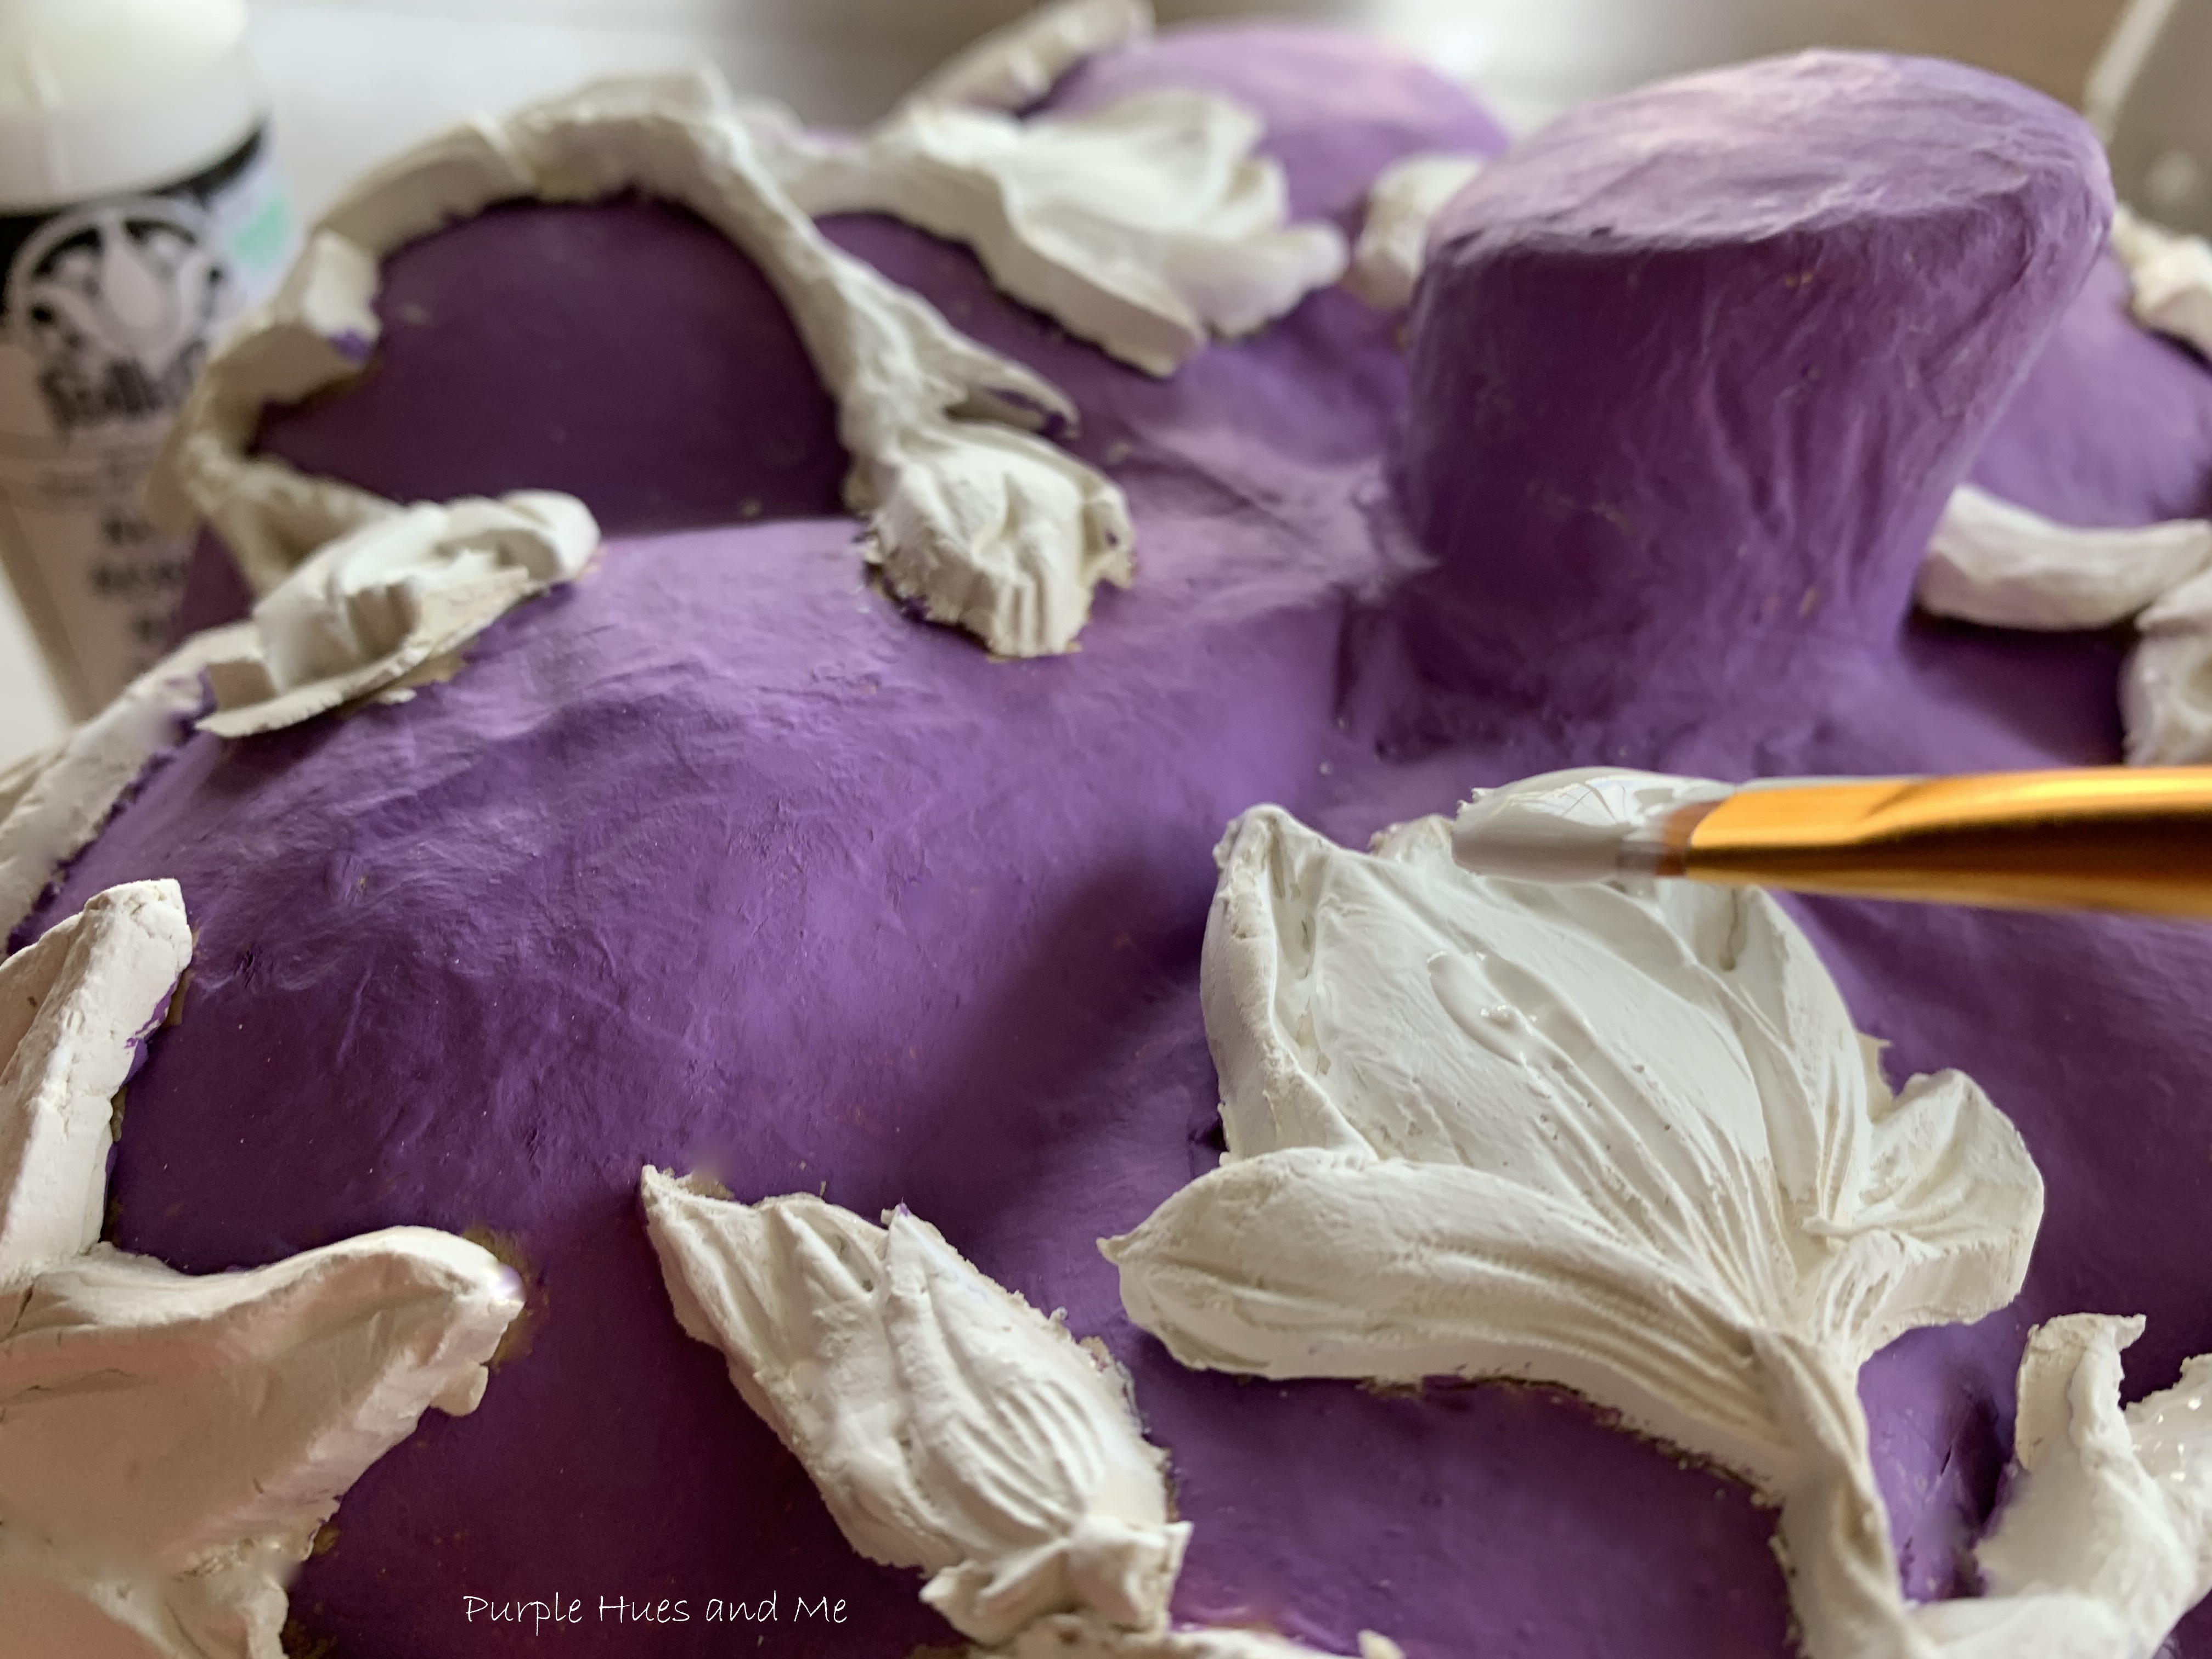 Purple Hues and Me: Embellish Pumpkin with Flower Molds